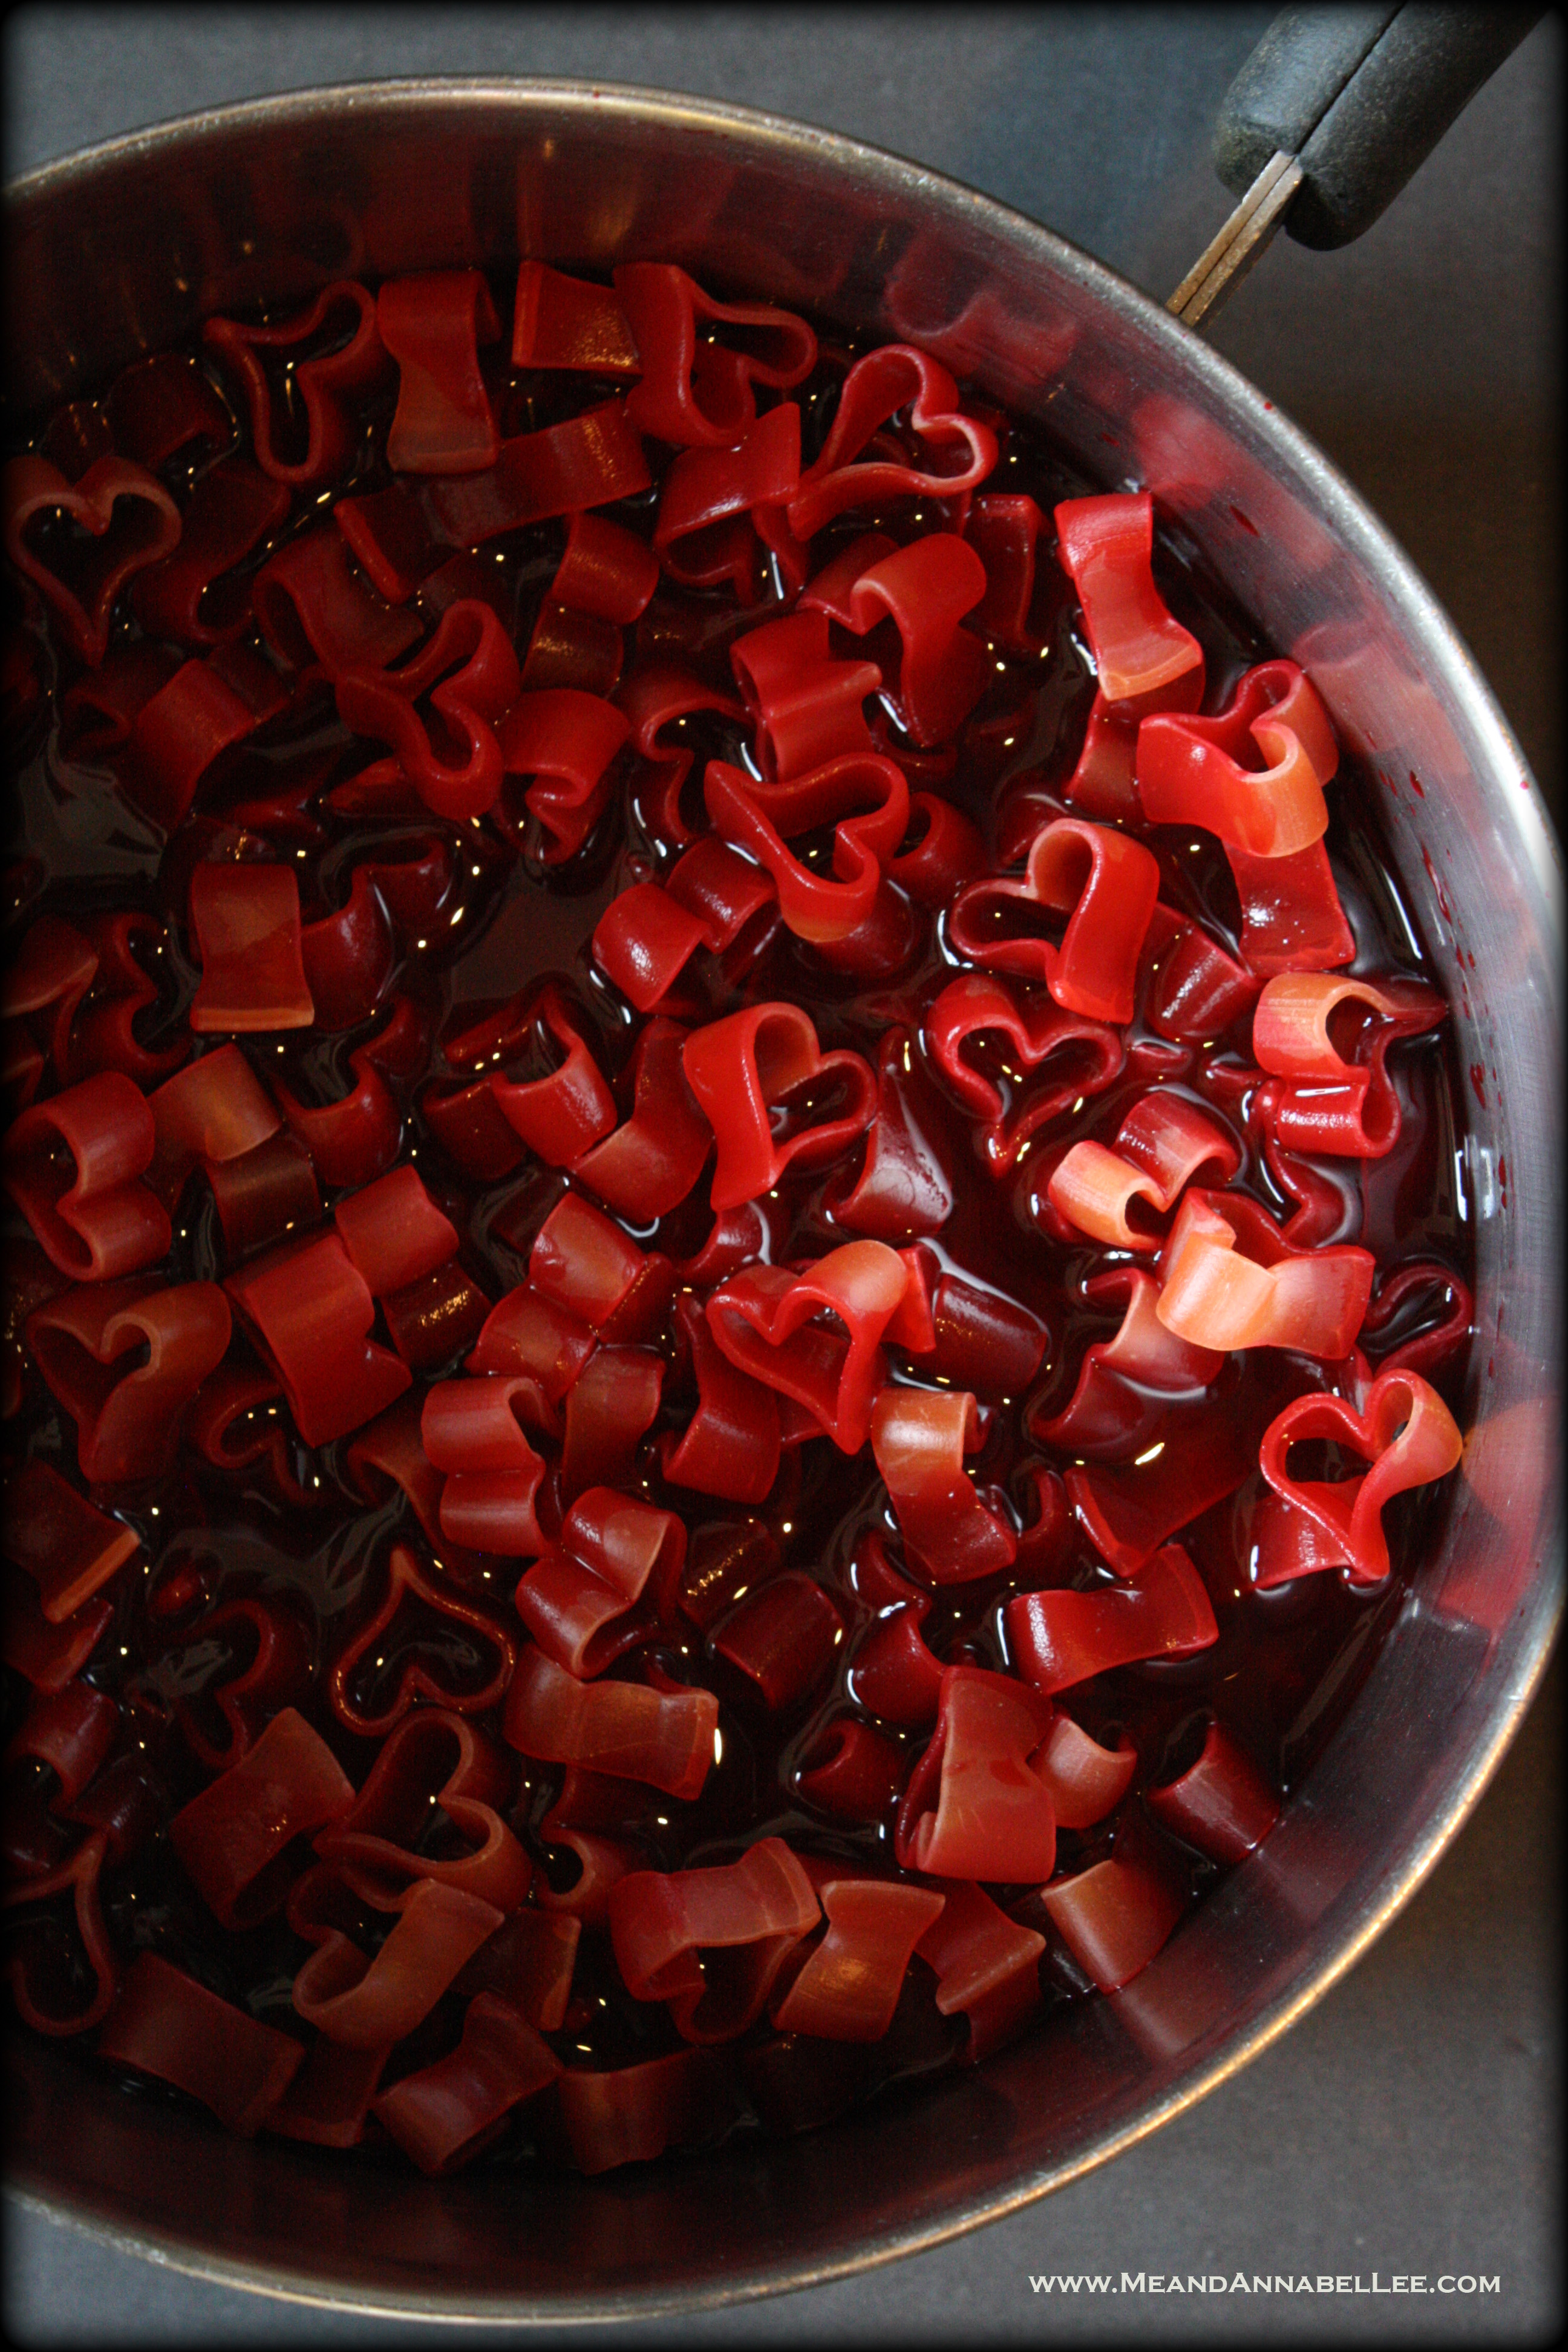 Gothic Valentine Bloody Heart Pasta Dinner | How to dye pasta red | Dark Valentine’s Day Meal | Heart Shaped Pasta | Cooking with Beet Juice | www.MeandAnnabelLee.com